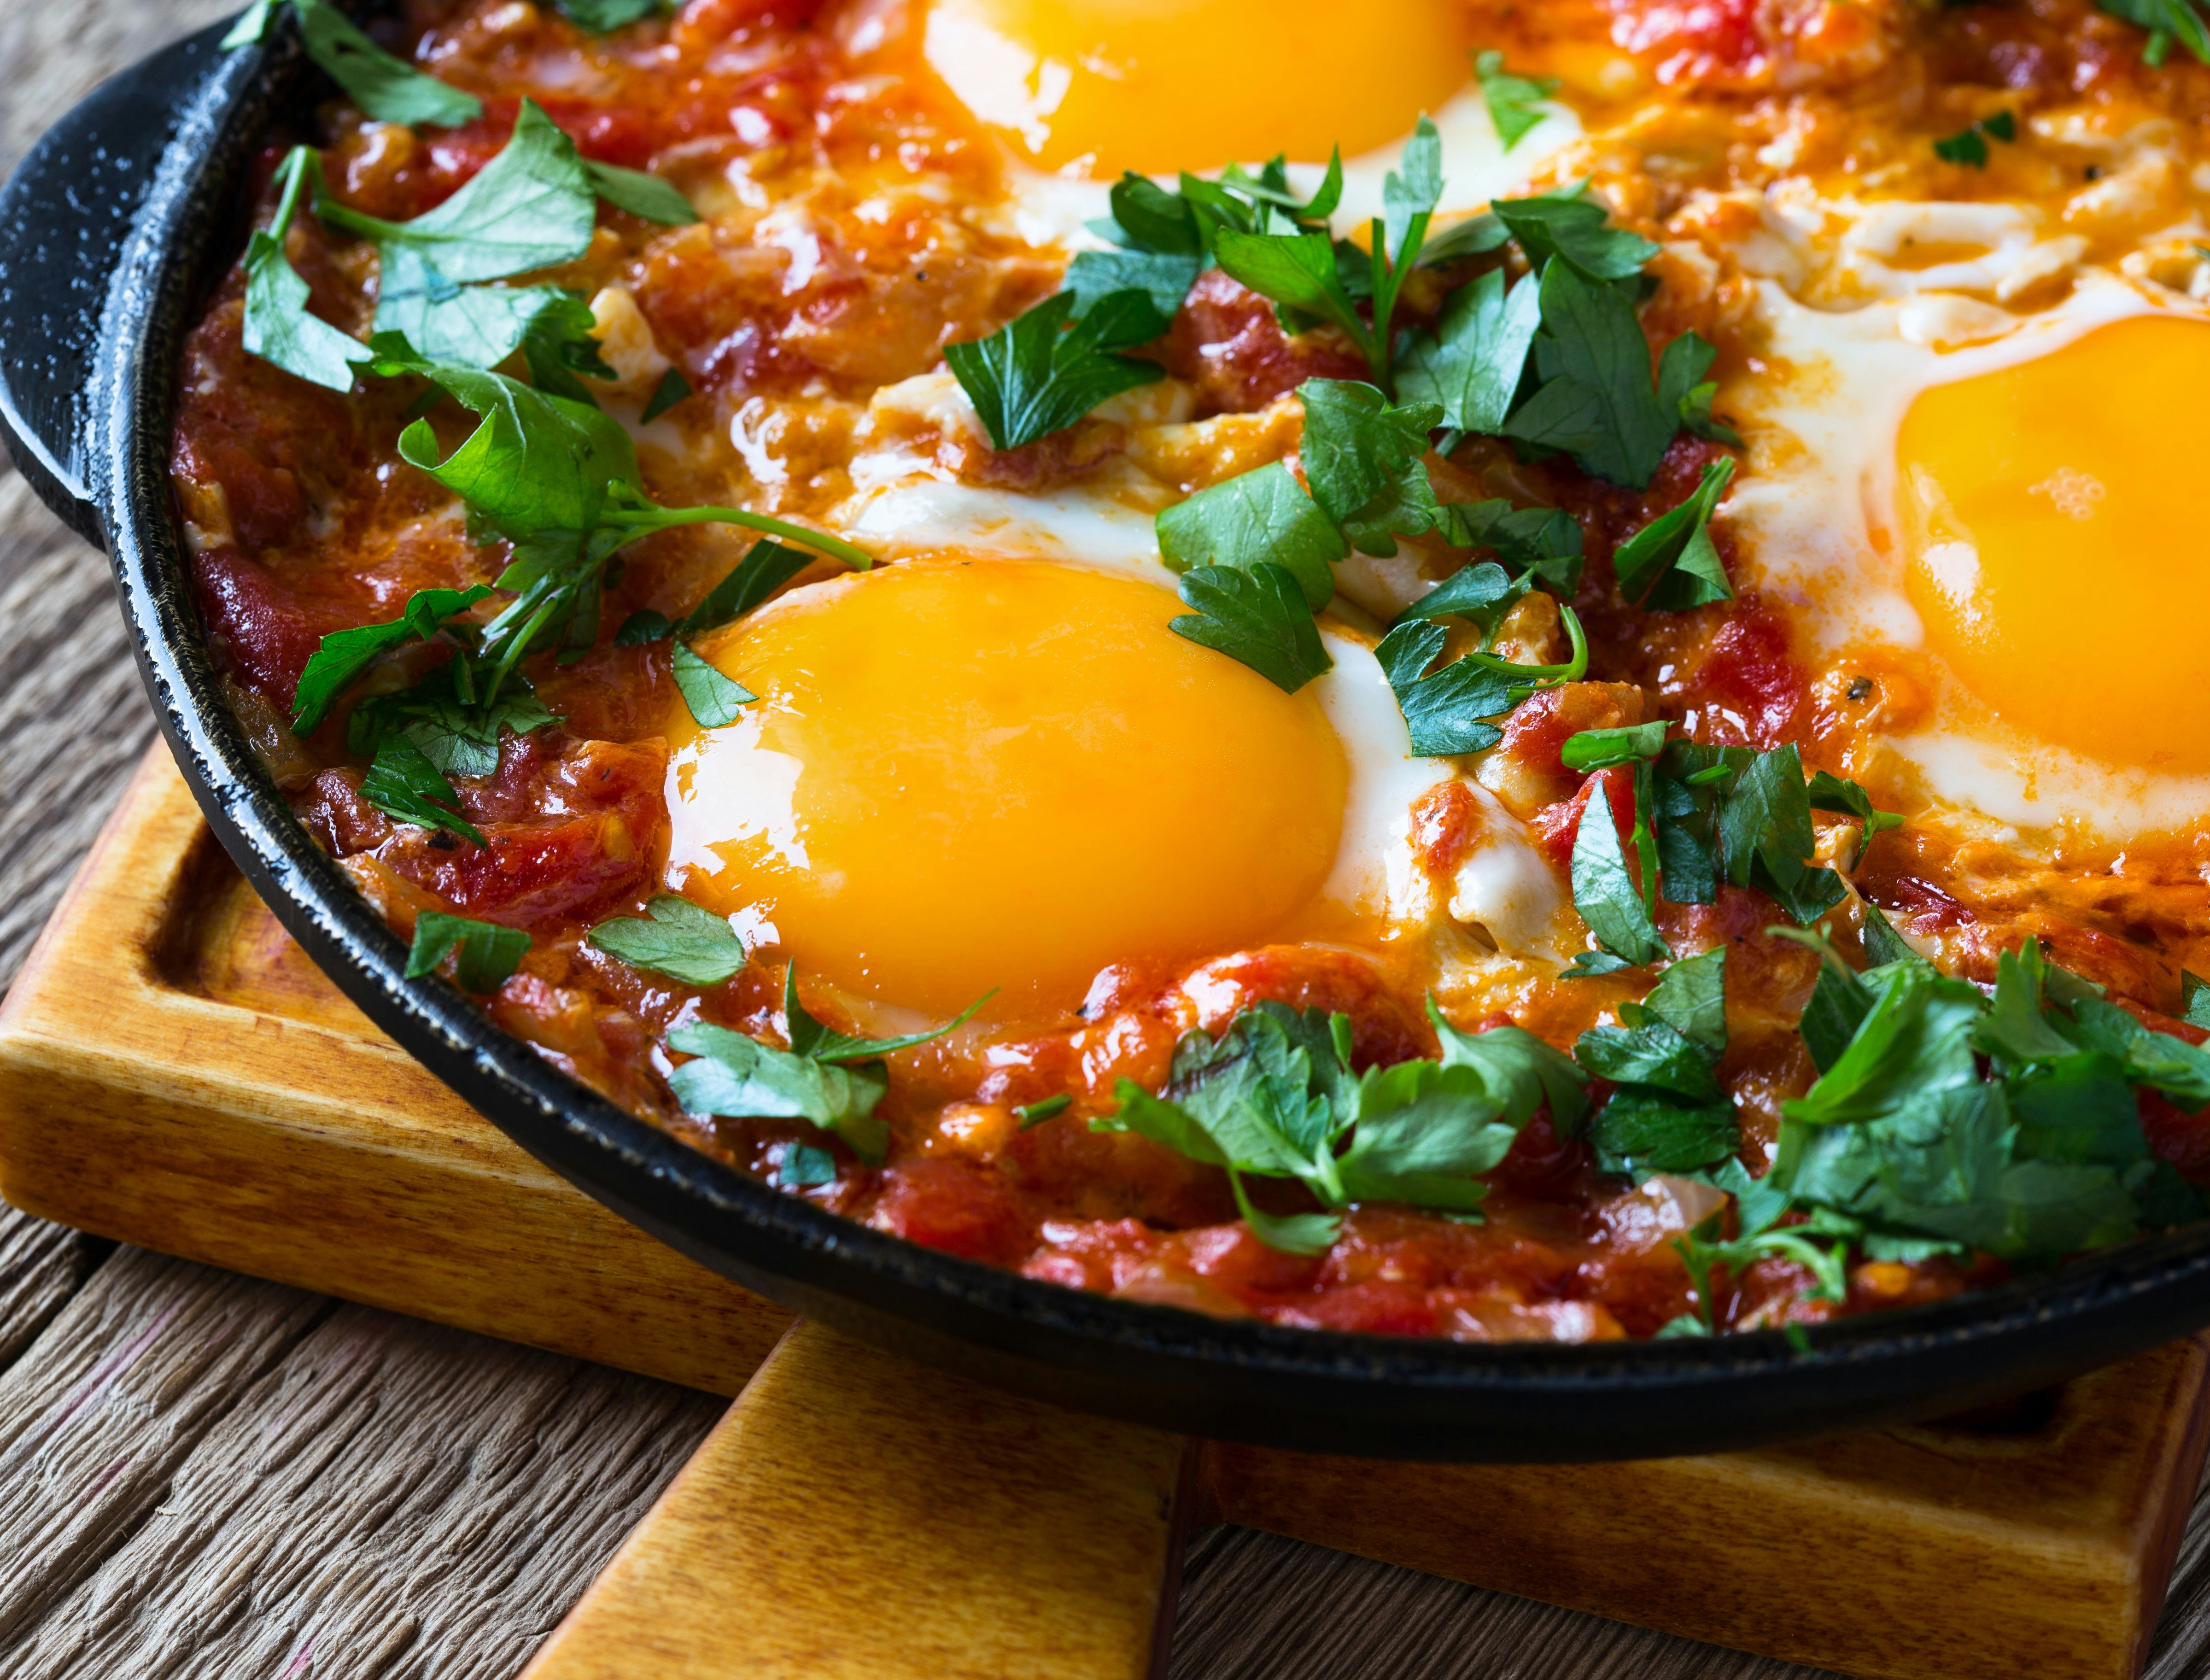 A close-up view of shakshouka in a large black pan. The yellow egg yolks stand out against the red sauce of the dish.